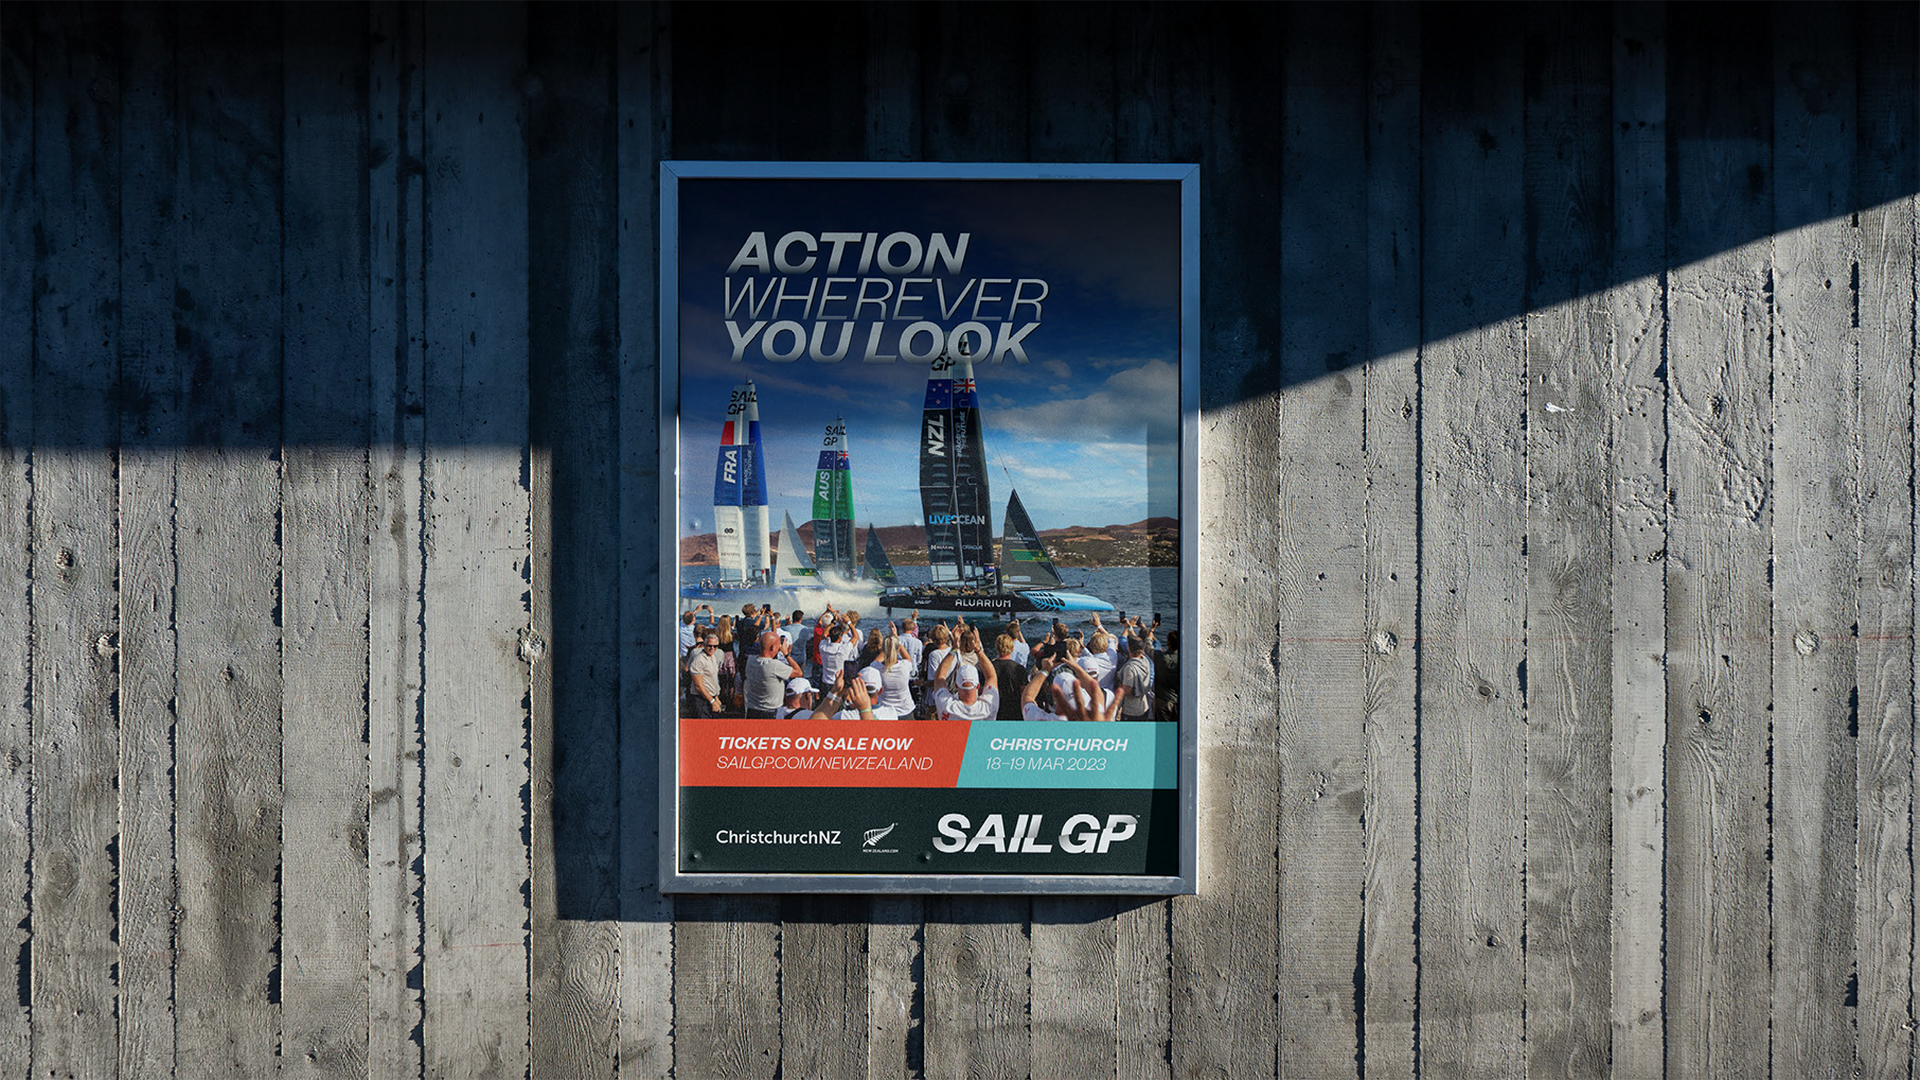 Concept of Sail GP poster